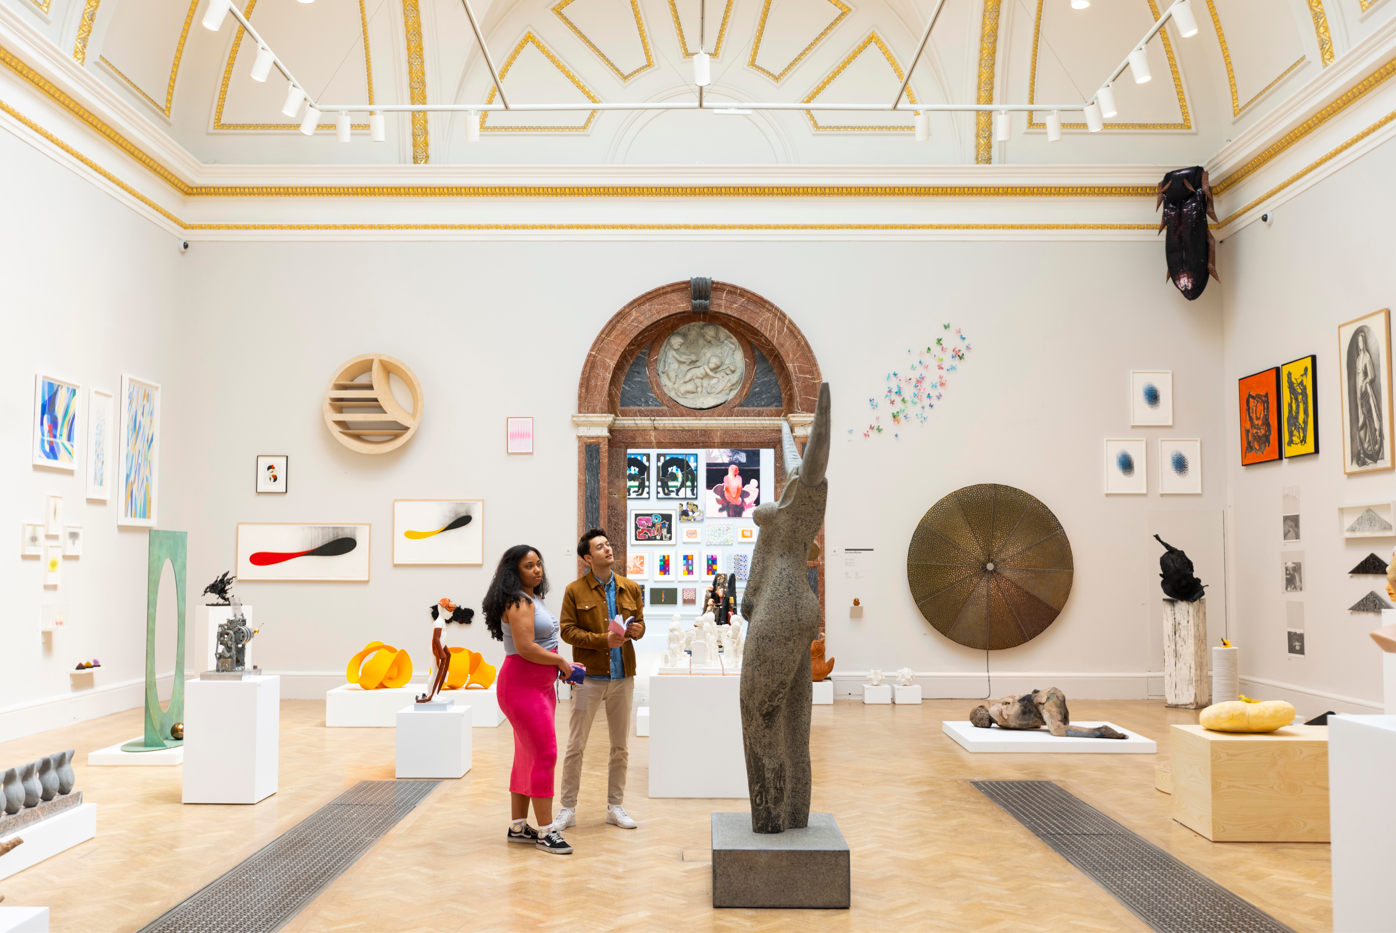 Installation view of the Summer Exhibition 2023 at the Royal Academy of Arts in London, 13 June - 20 August 2023. Photo: © Royal Academy of Arts, London / David Parry